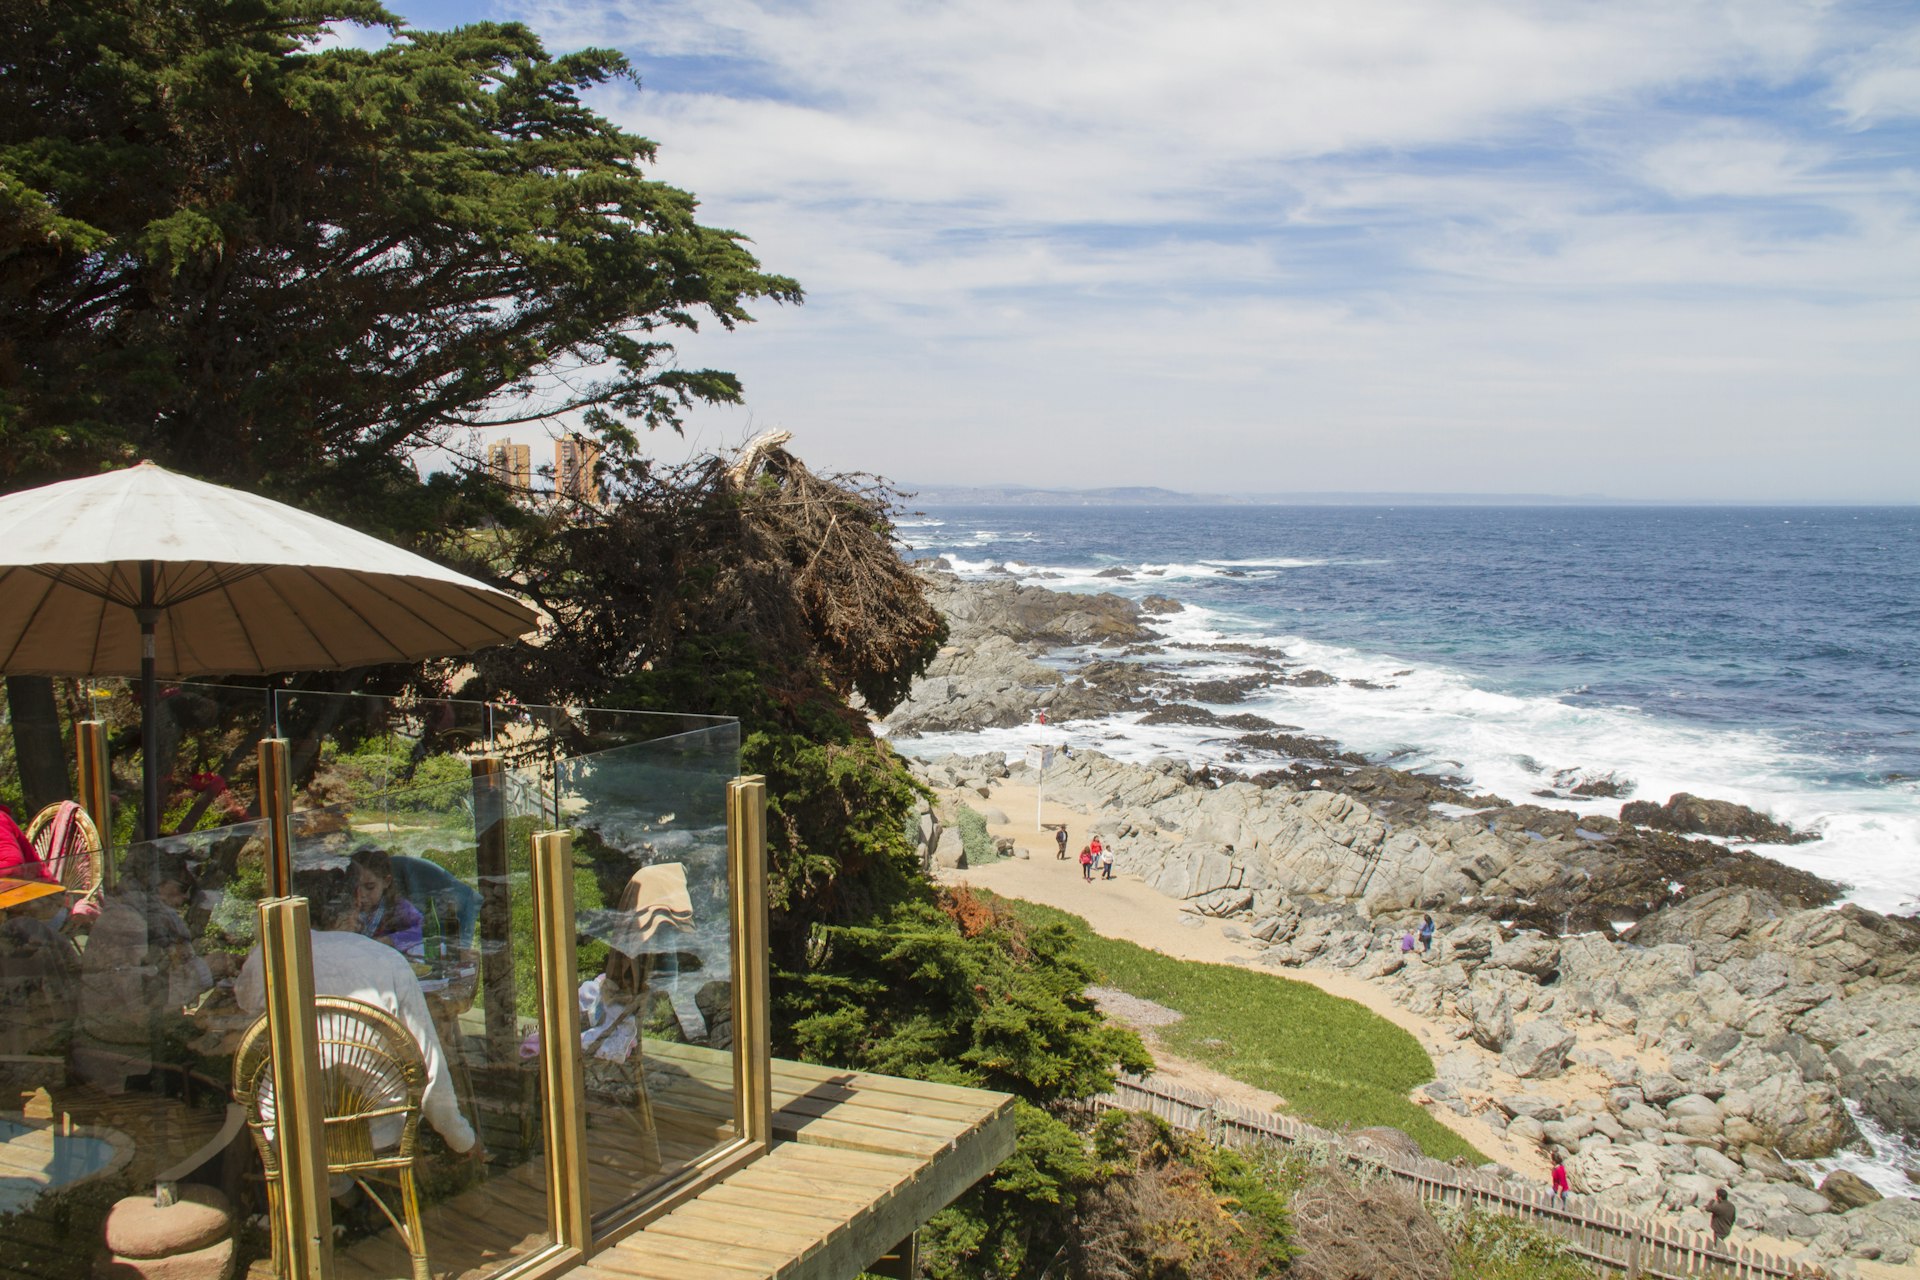 A family eats in a restaurant on a platform overlooking a sandy beach with some rocky sections on Isla Negra, Chile